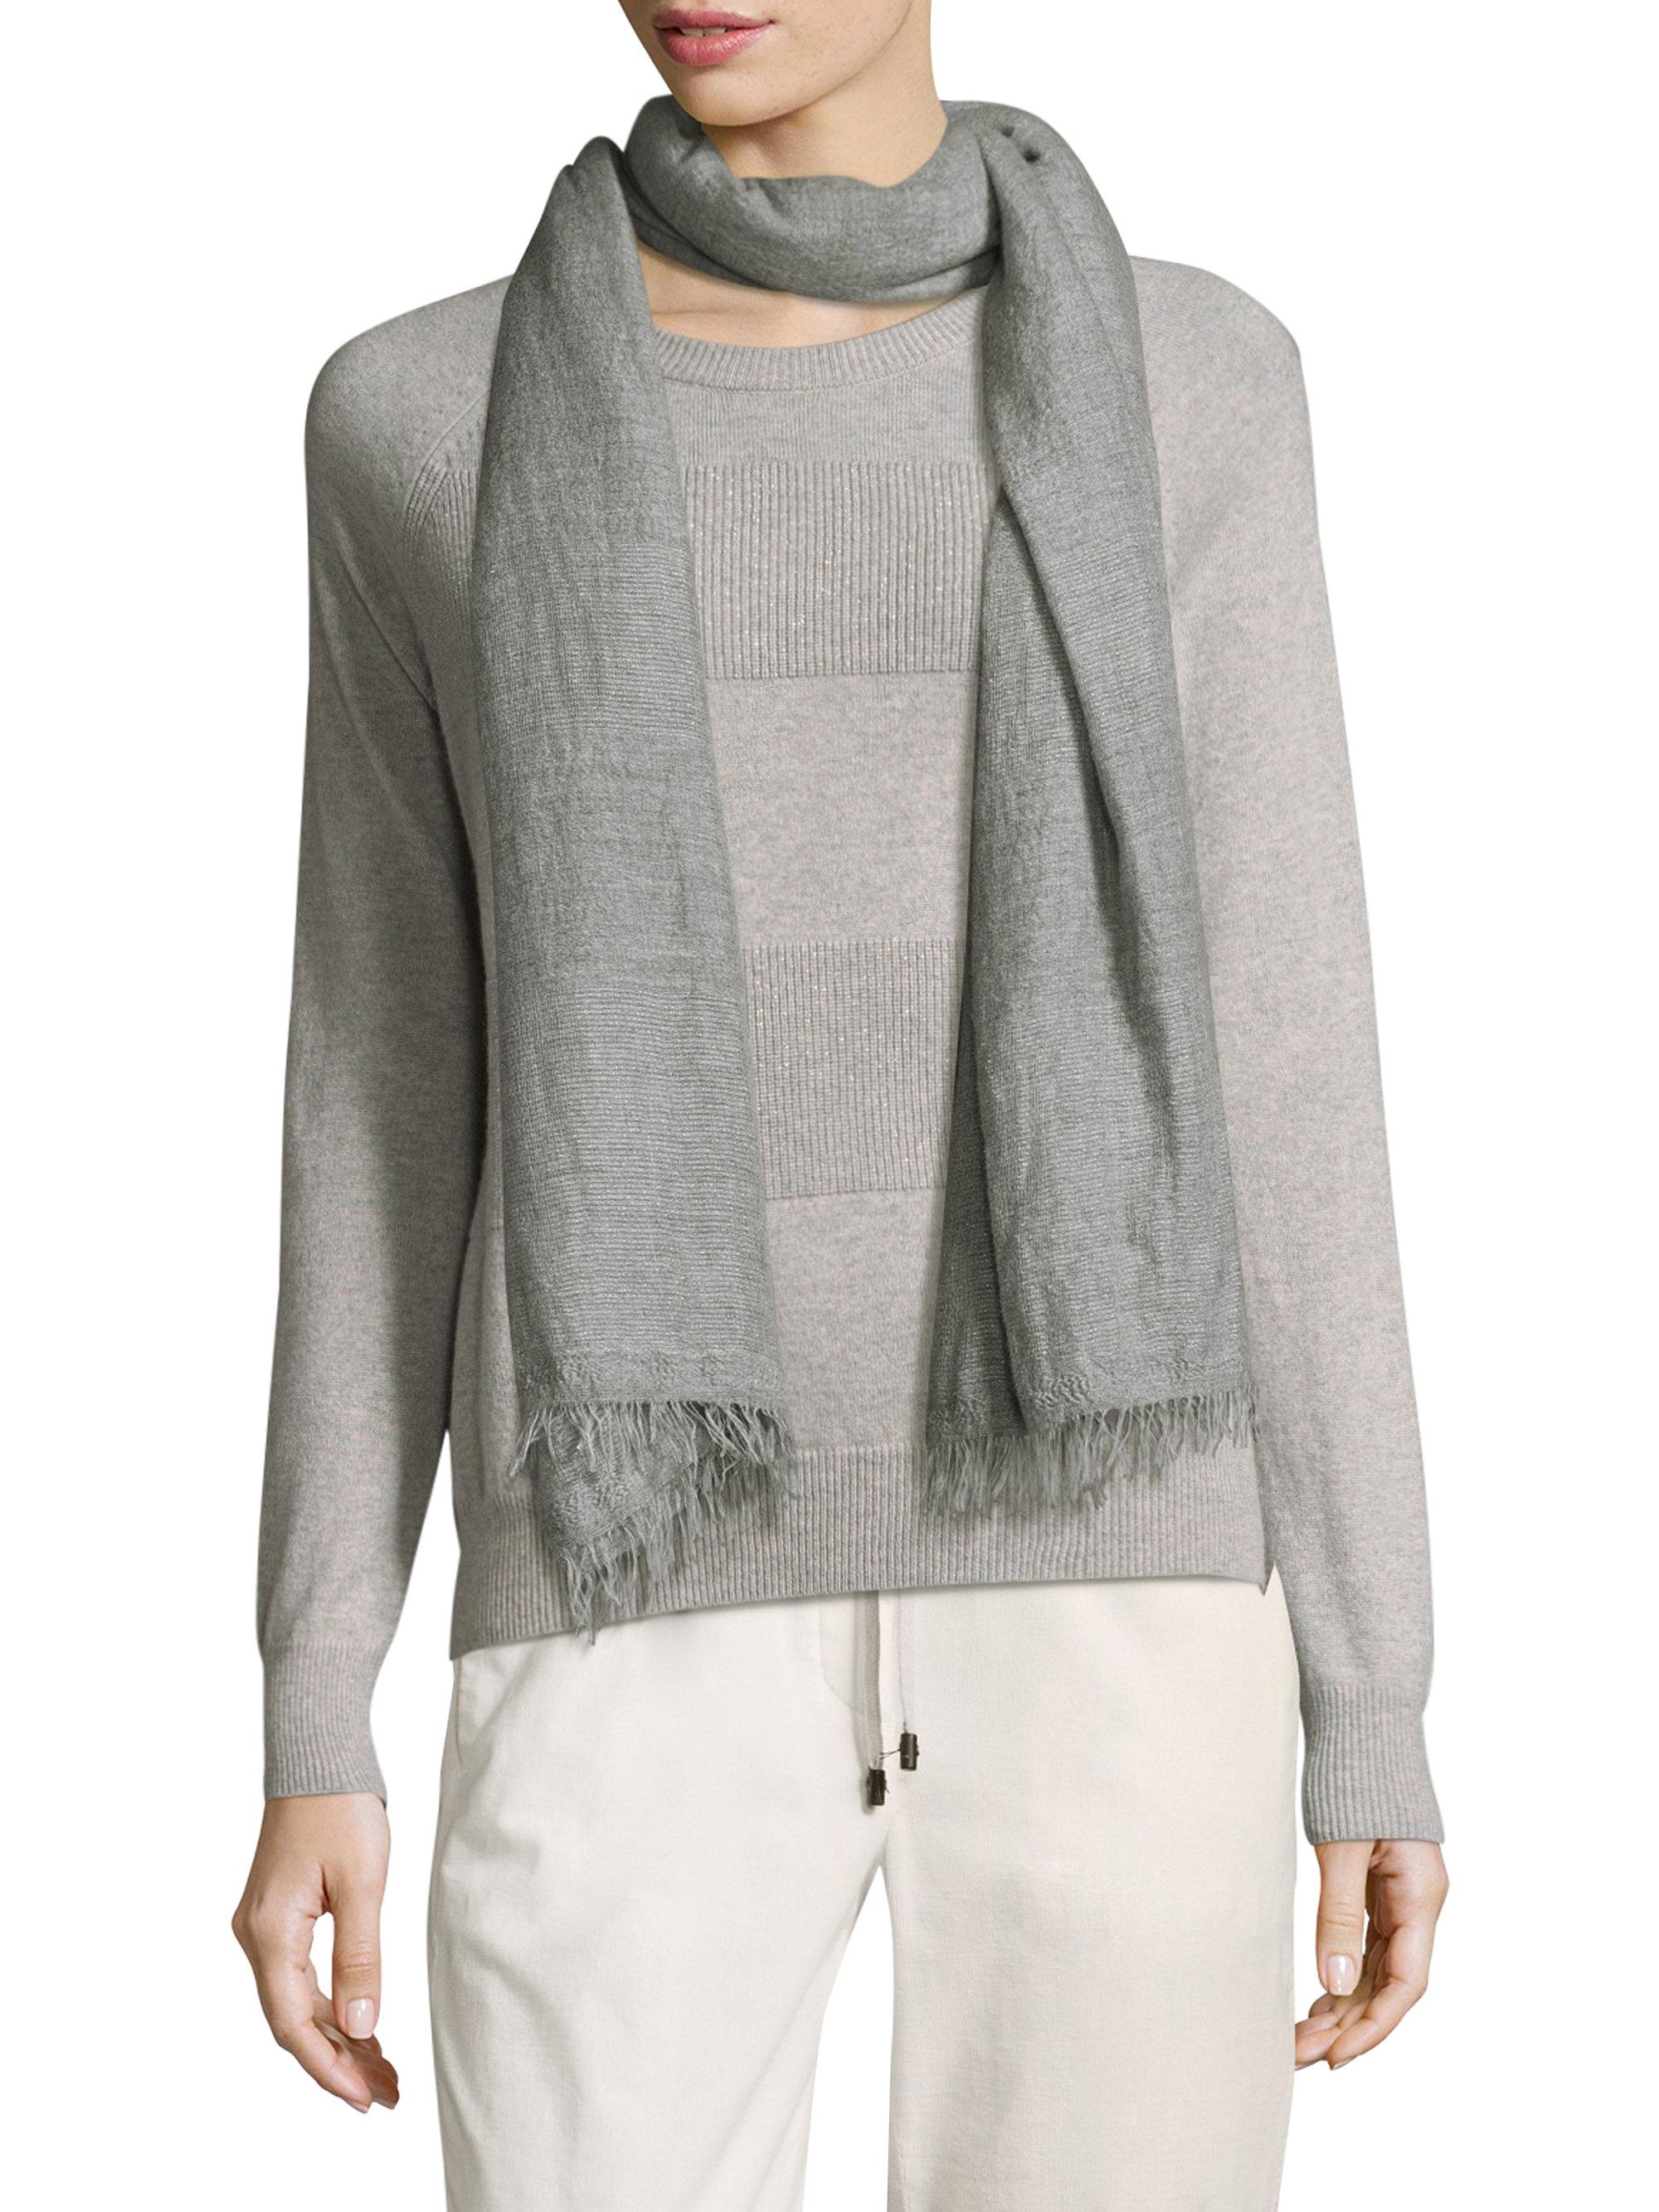 Lyst - Peserico Chambray Frayed Scarf in Gray